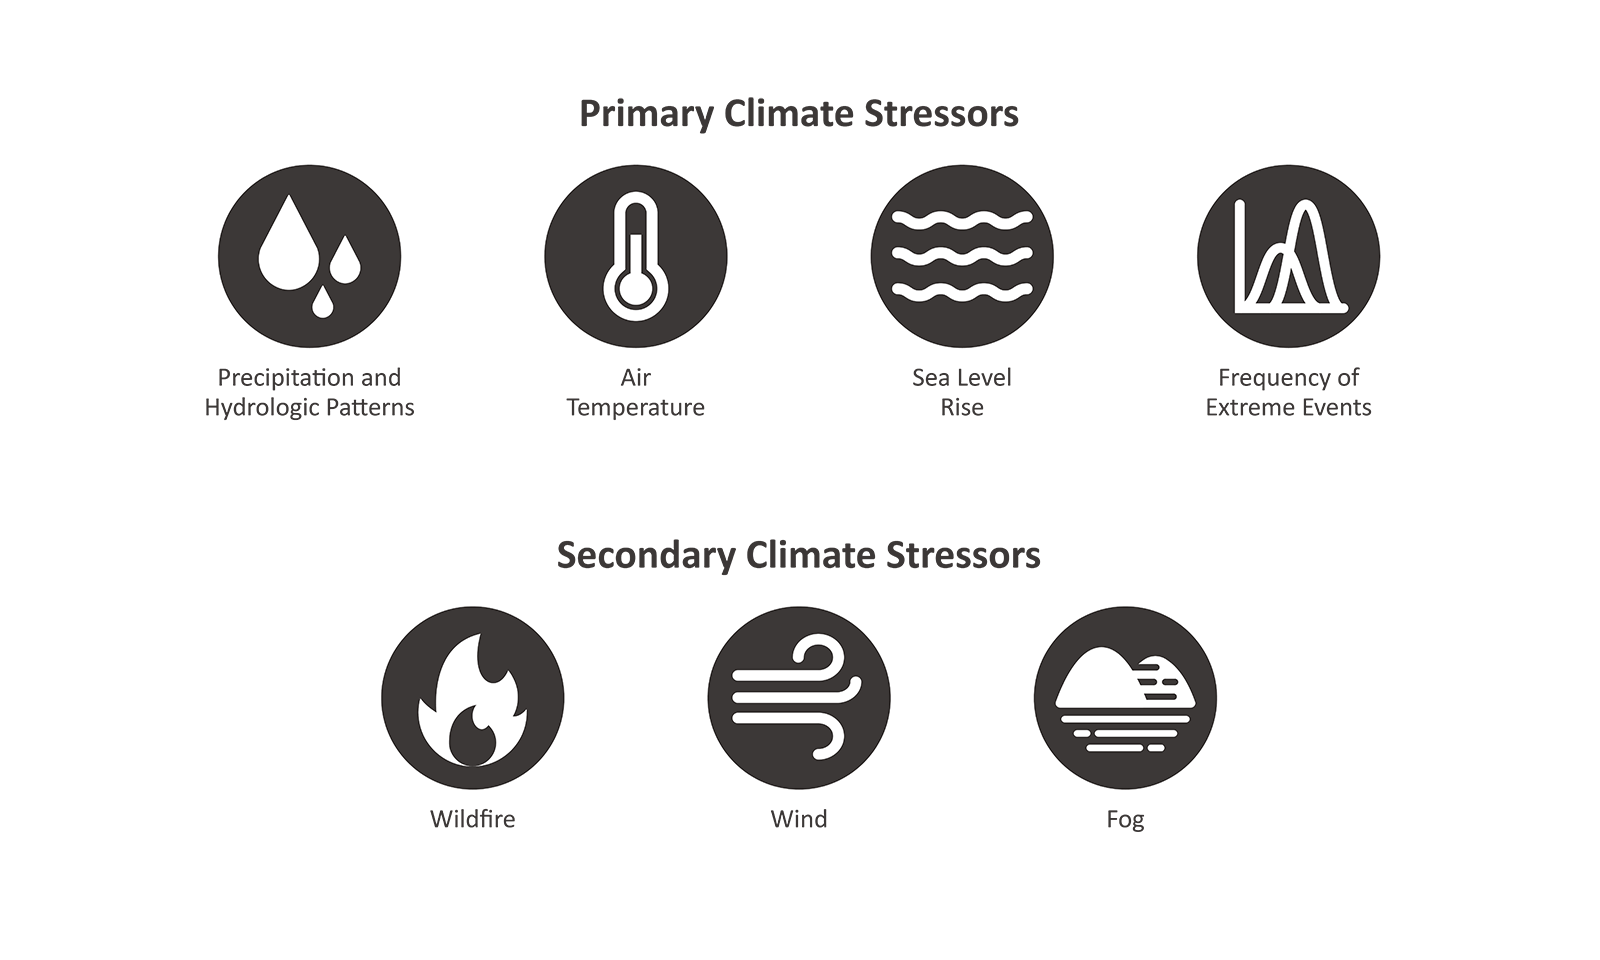 Icons representing climate stressors in the Sacramento-San Joaquin Delta. Primary stressors include precipitation and hydrologic patterns, air temperature, sea level rise, and frequency of extreme events. Secondary stressors include wildlife, wind, and fog.